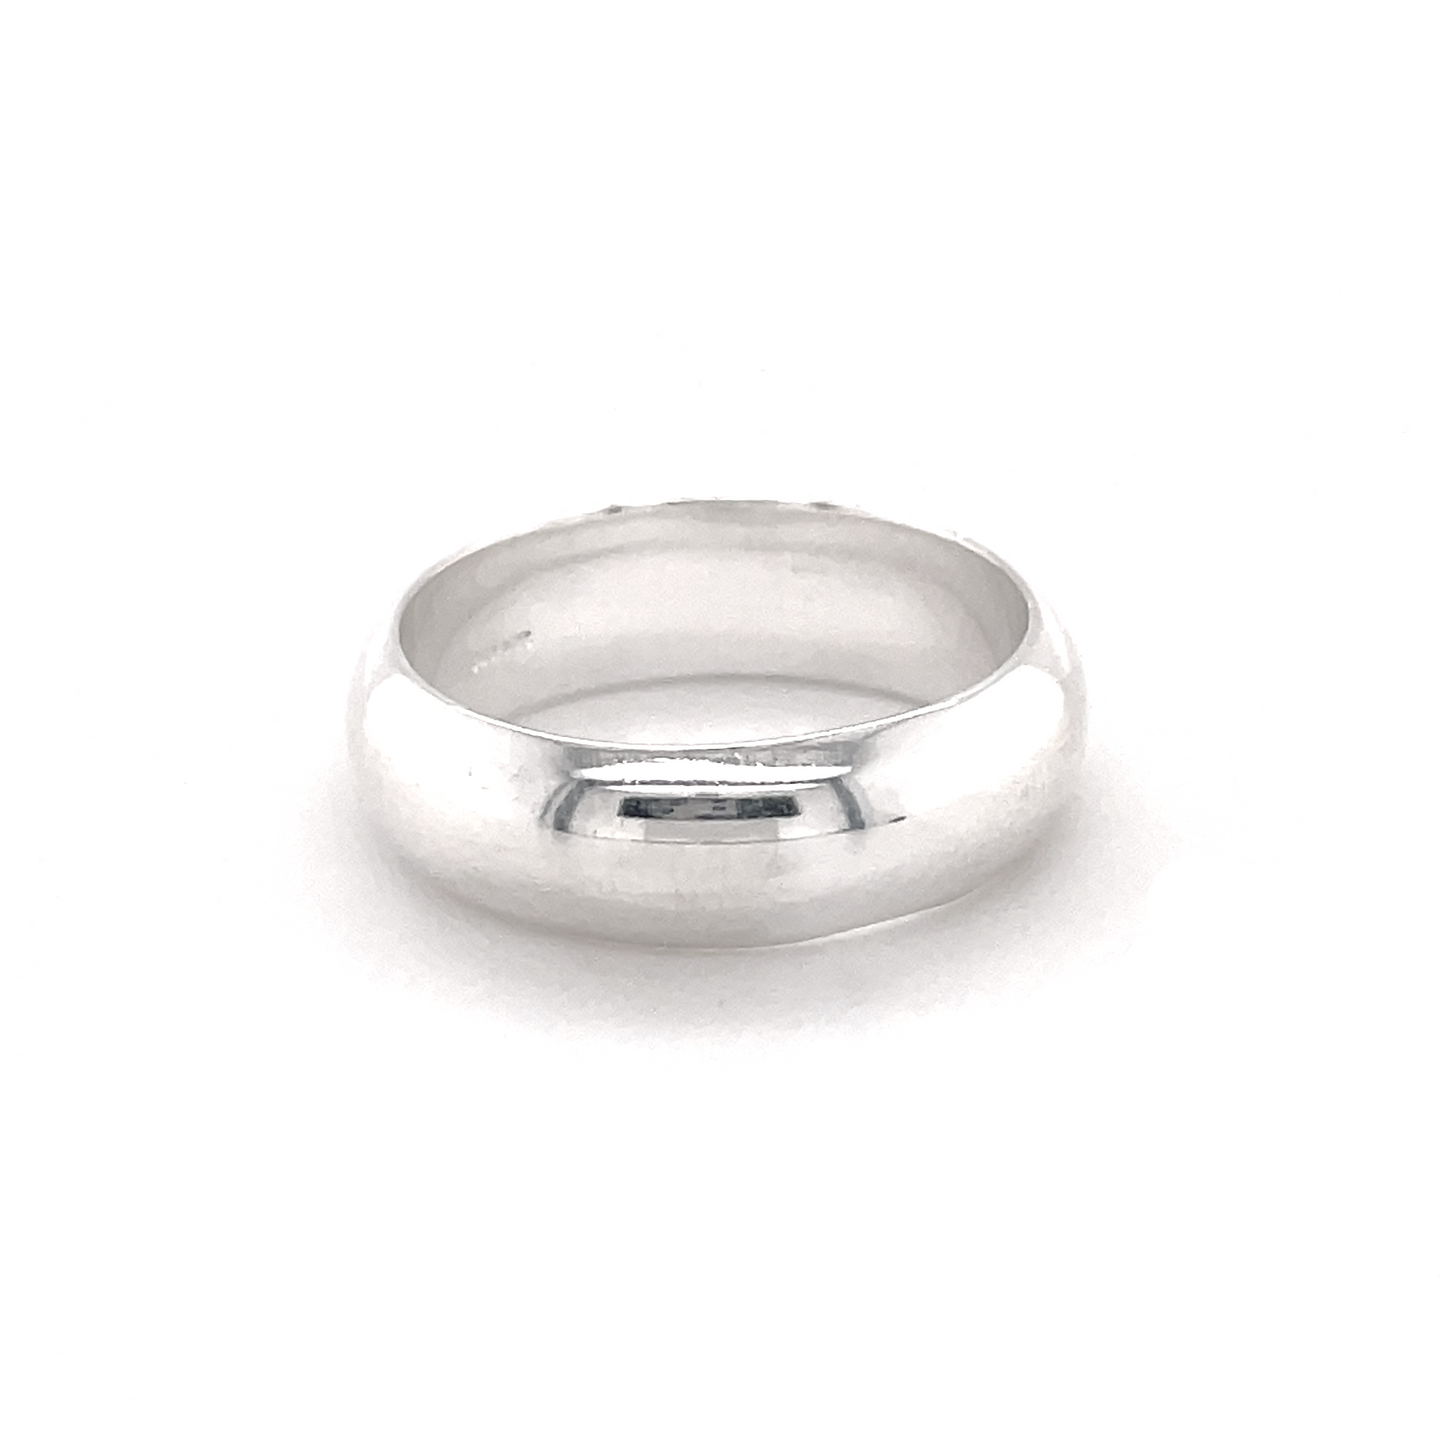 A 7mm Plain Band with rounded band on a white background.